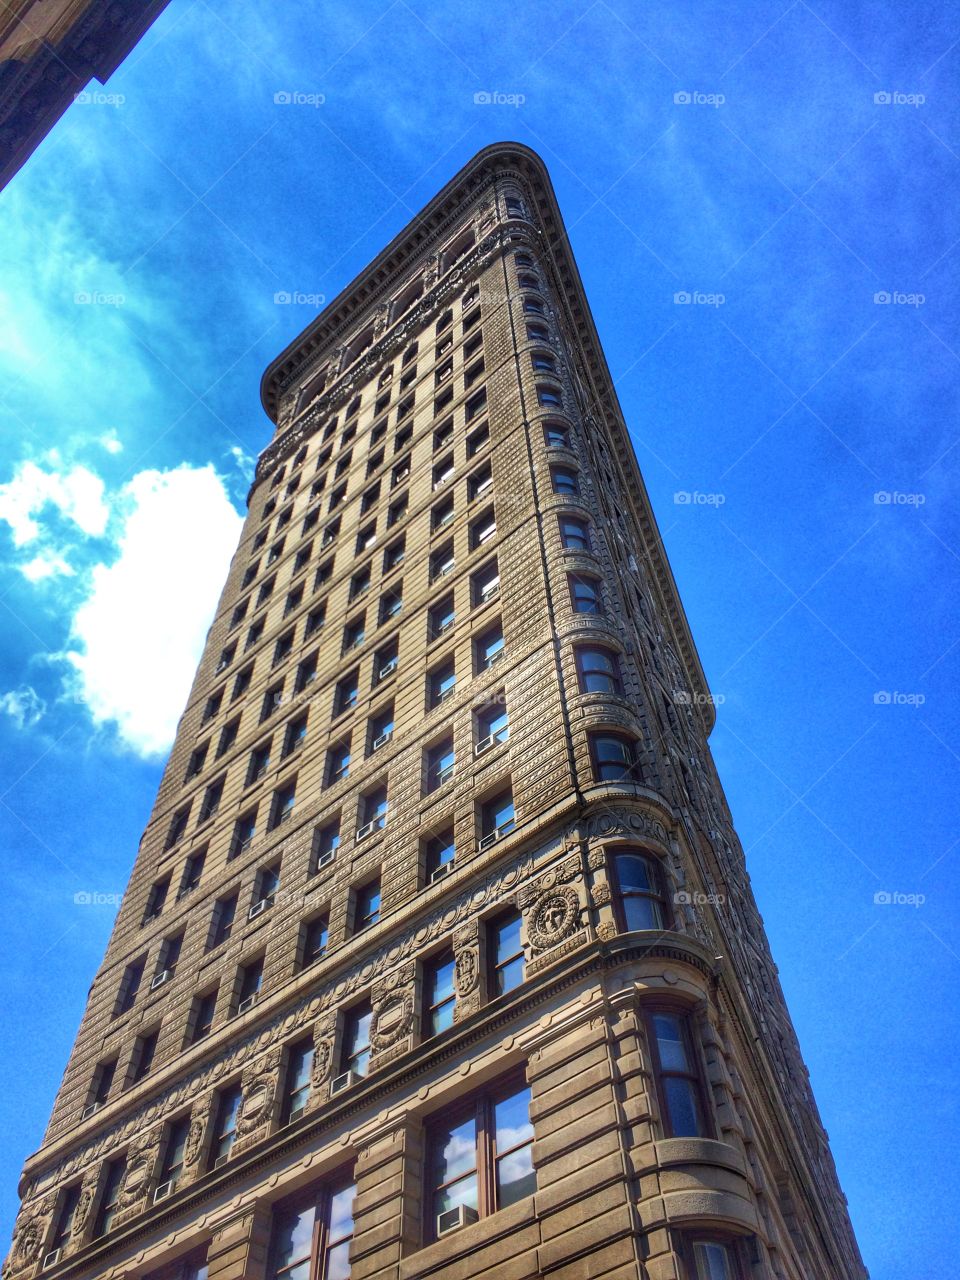 Flat Iron Building in NYC